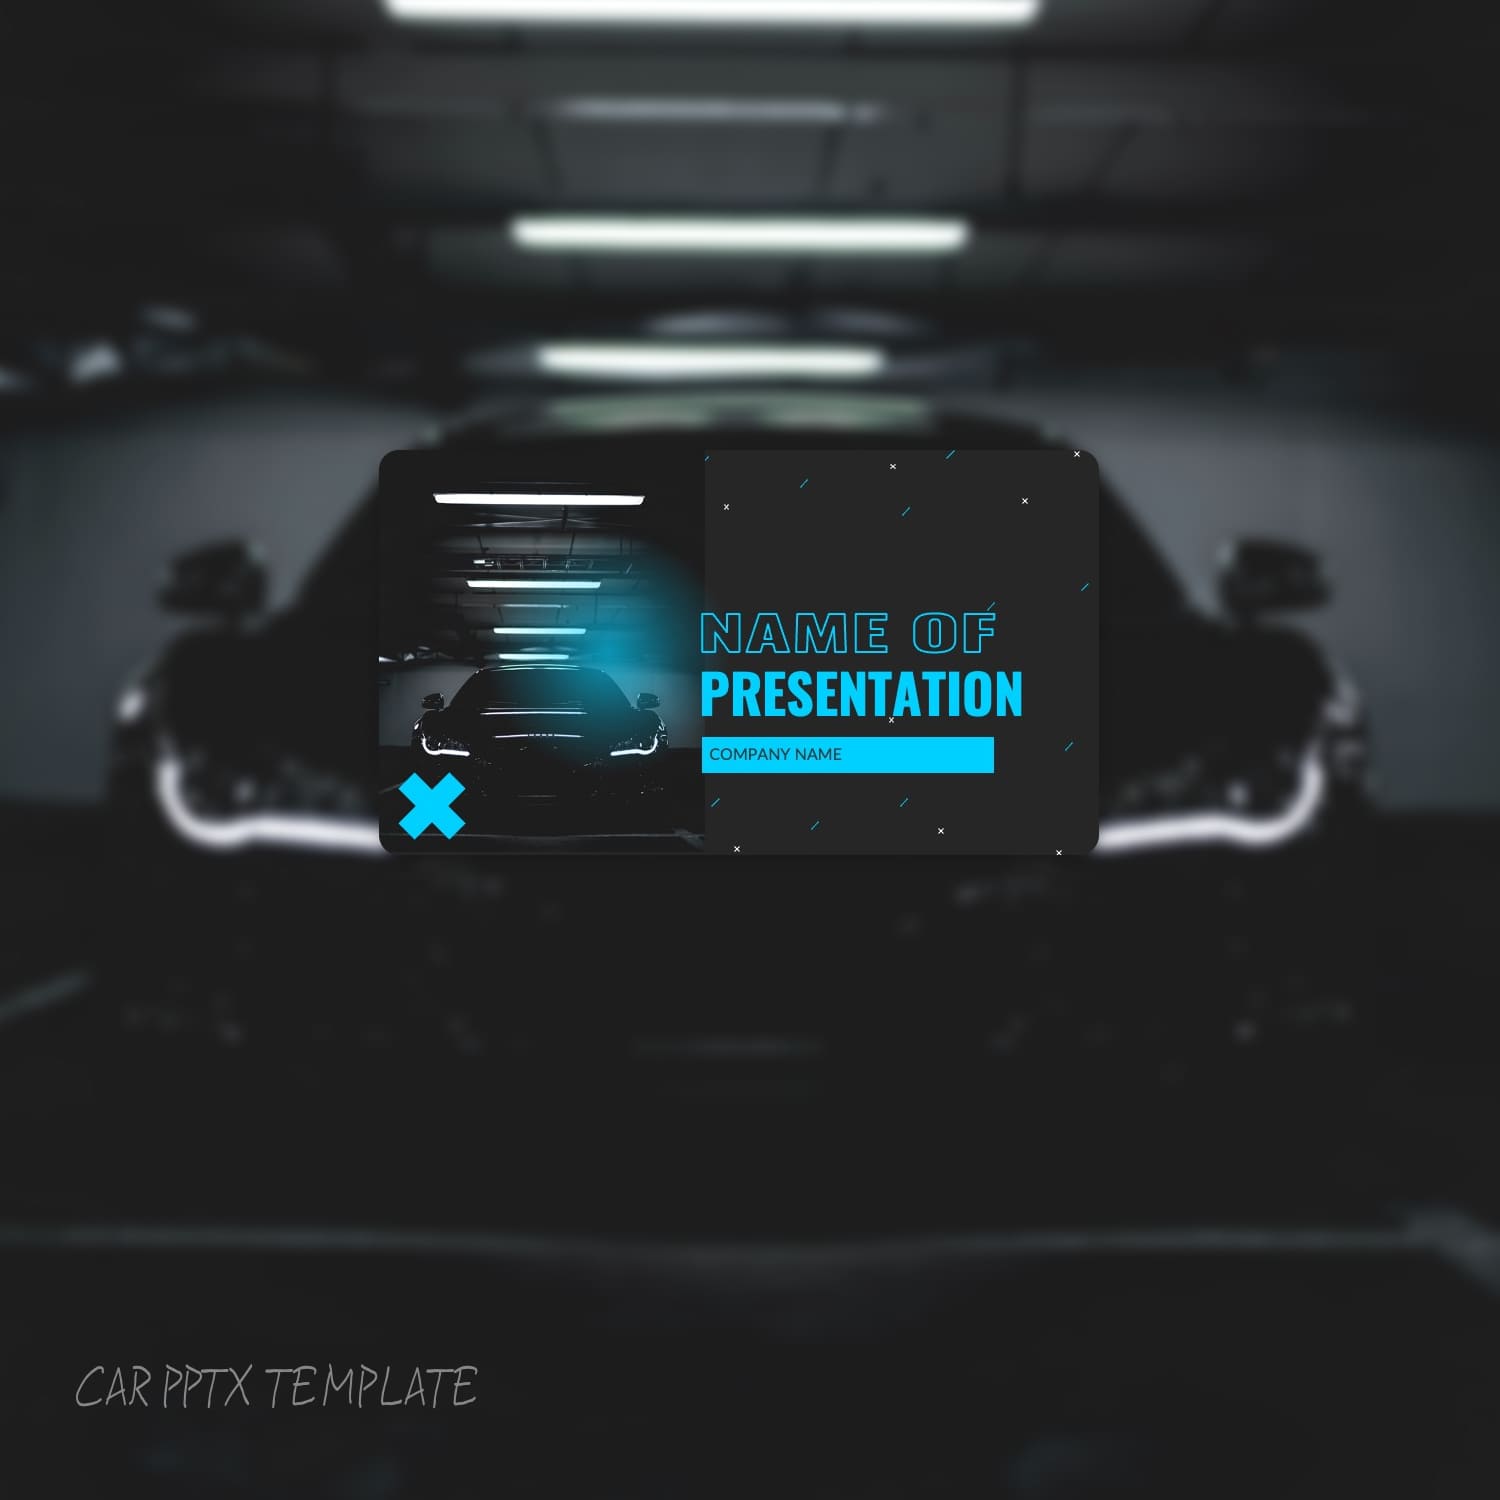 Car PPTX template - main image preview.